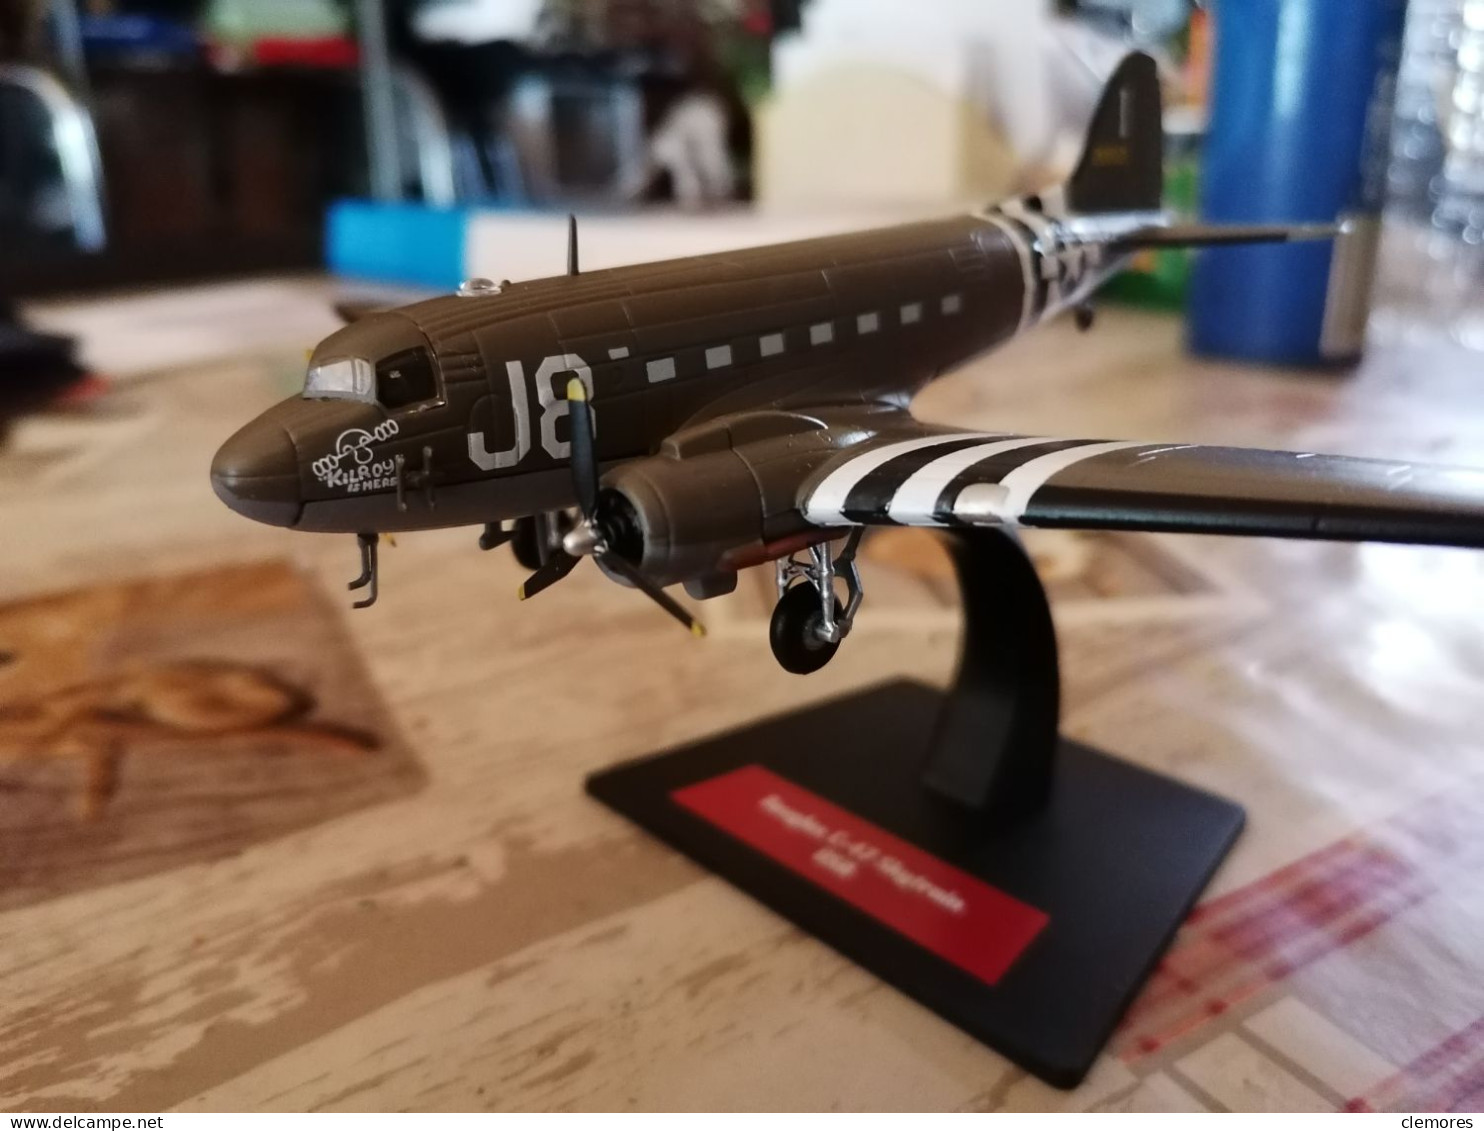 MAQUETTE C47 D - DAY 1/700 - Airplanes & Helicopters